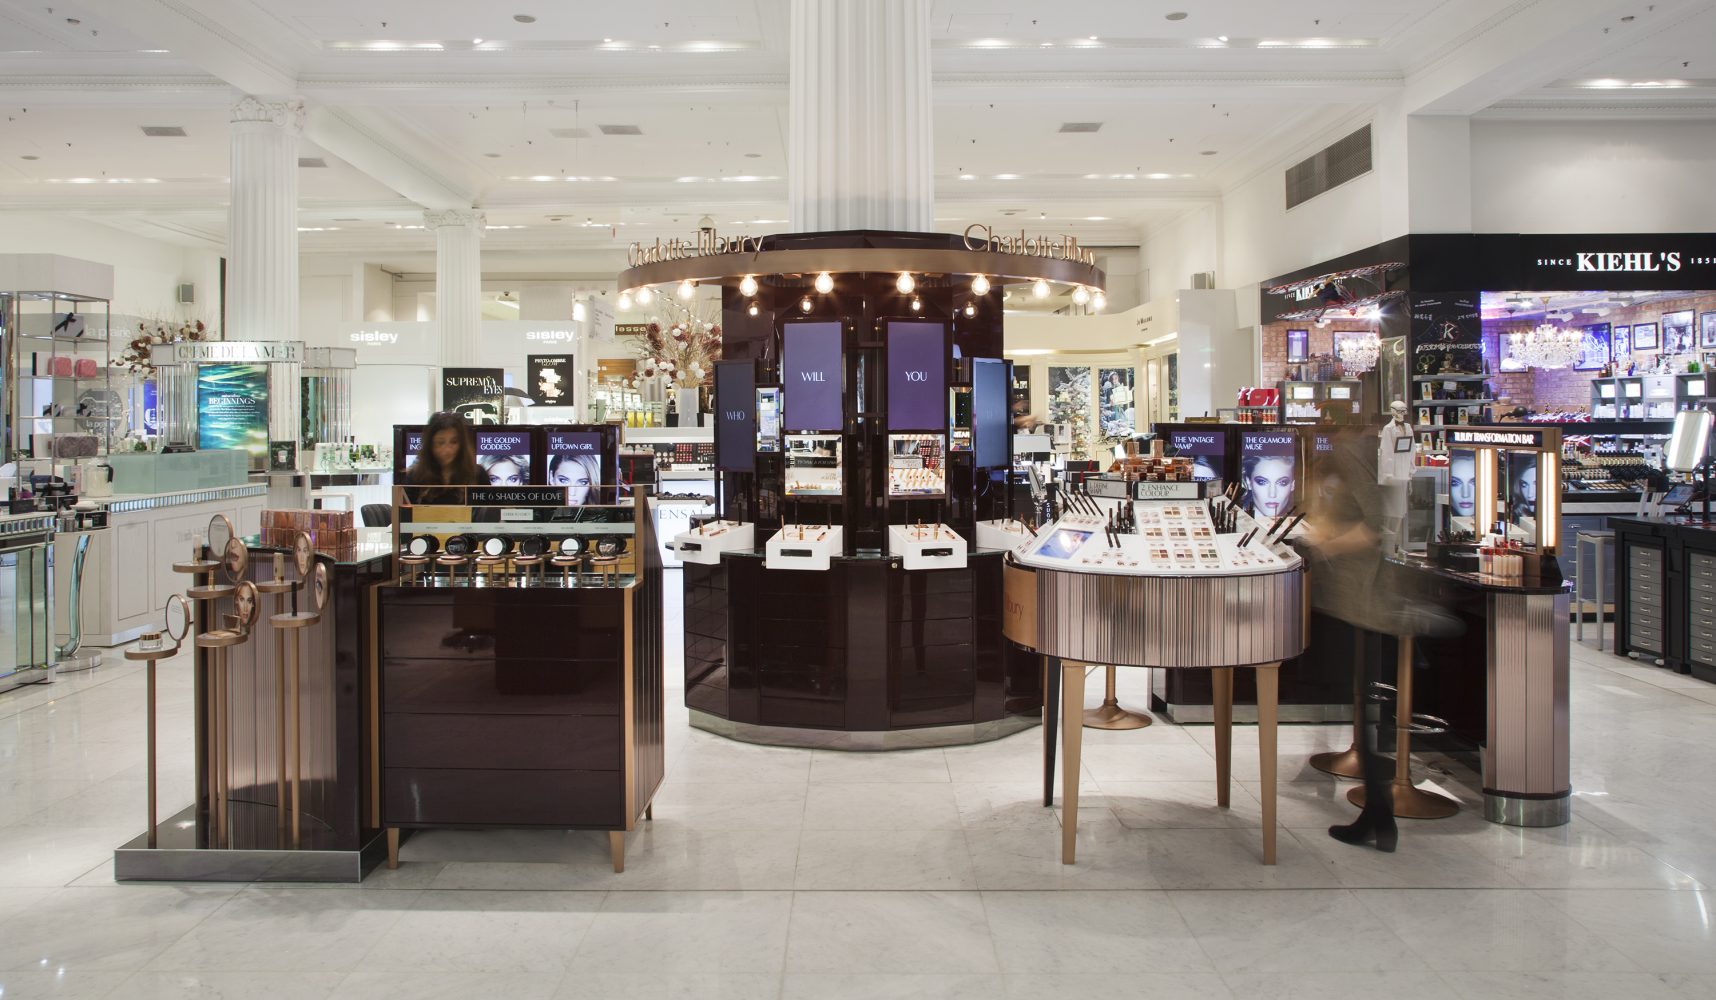 Image of Charlotte Tilbury retail footprint at Selfridges London, beauty retail concept, by Household.